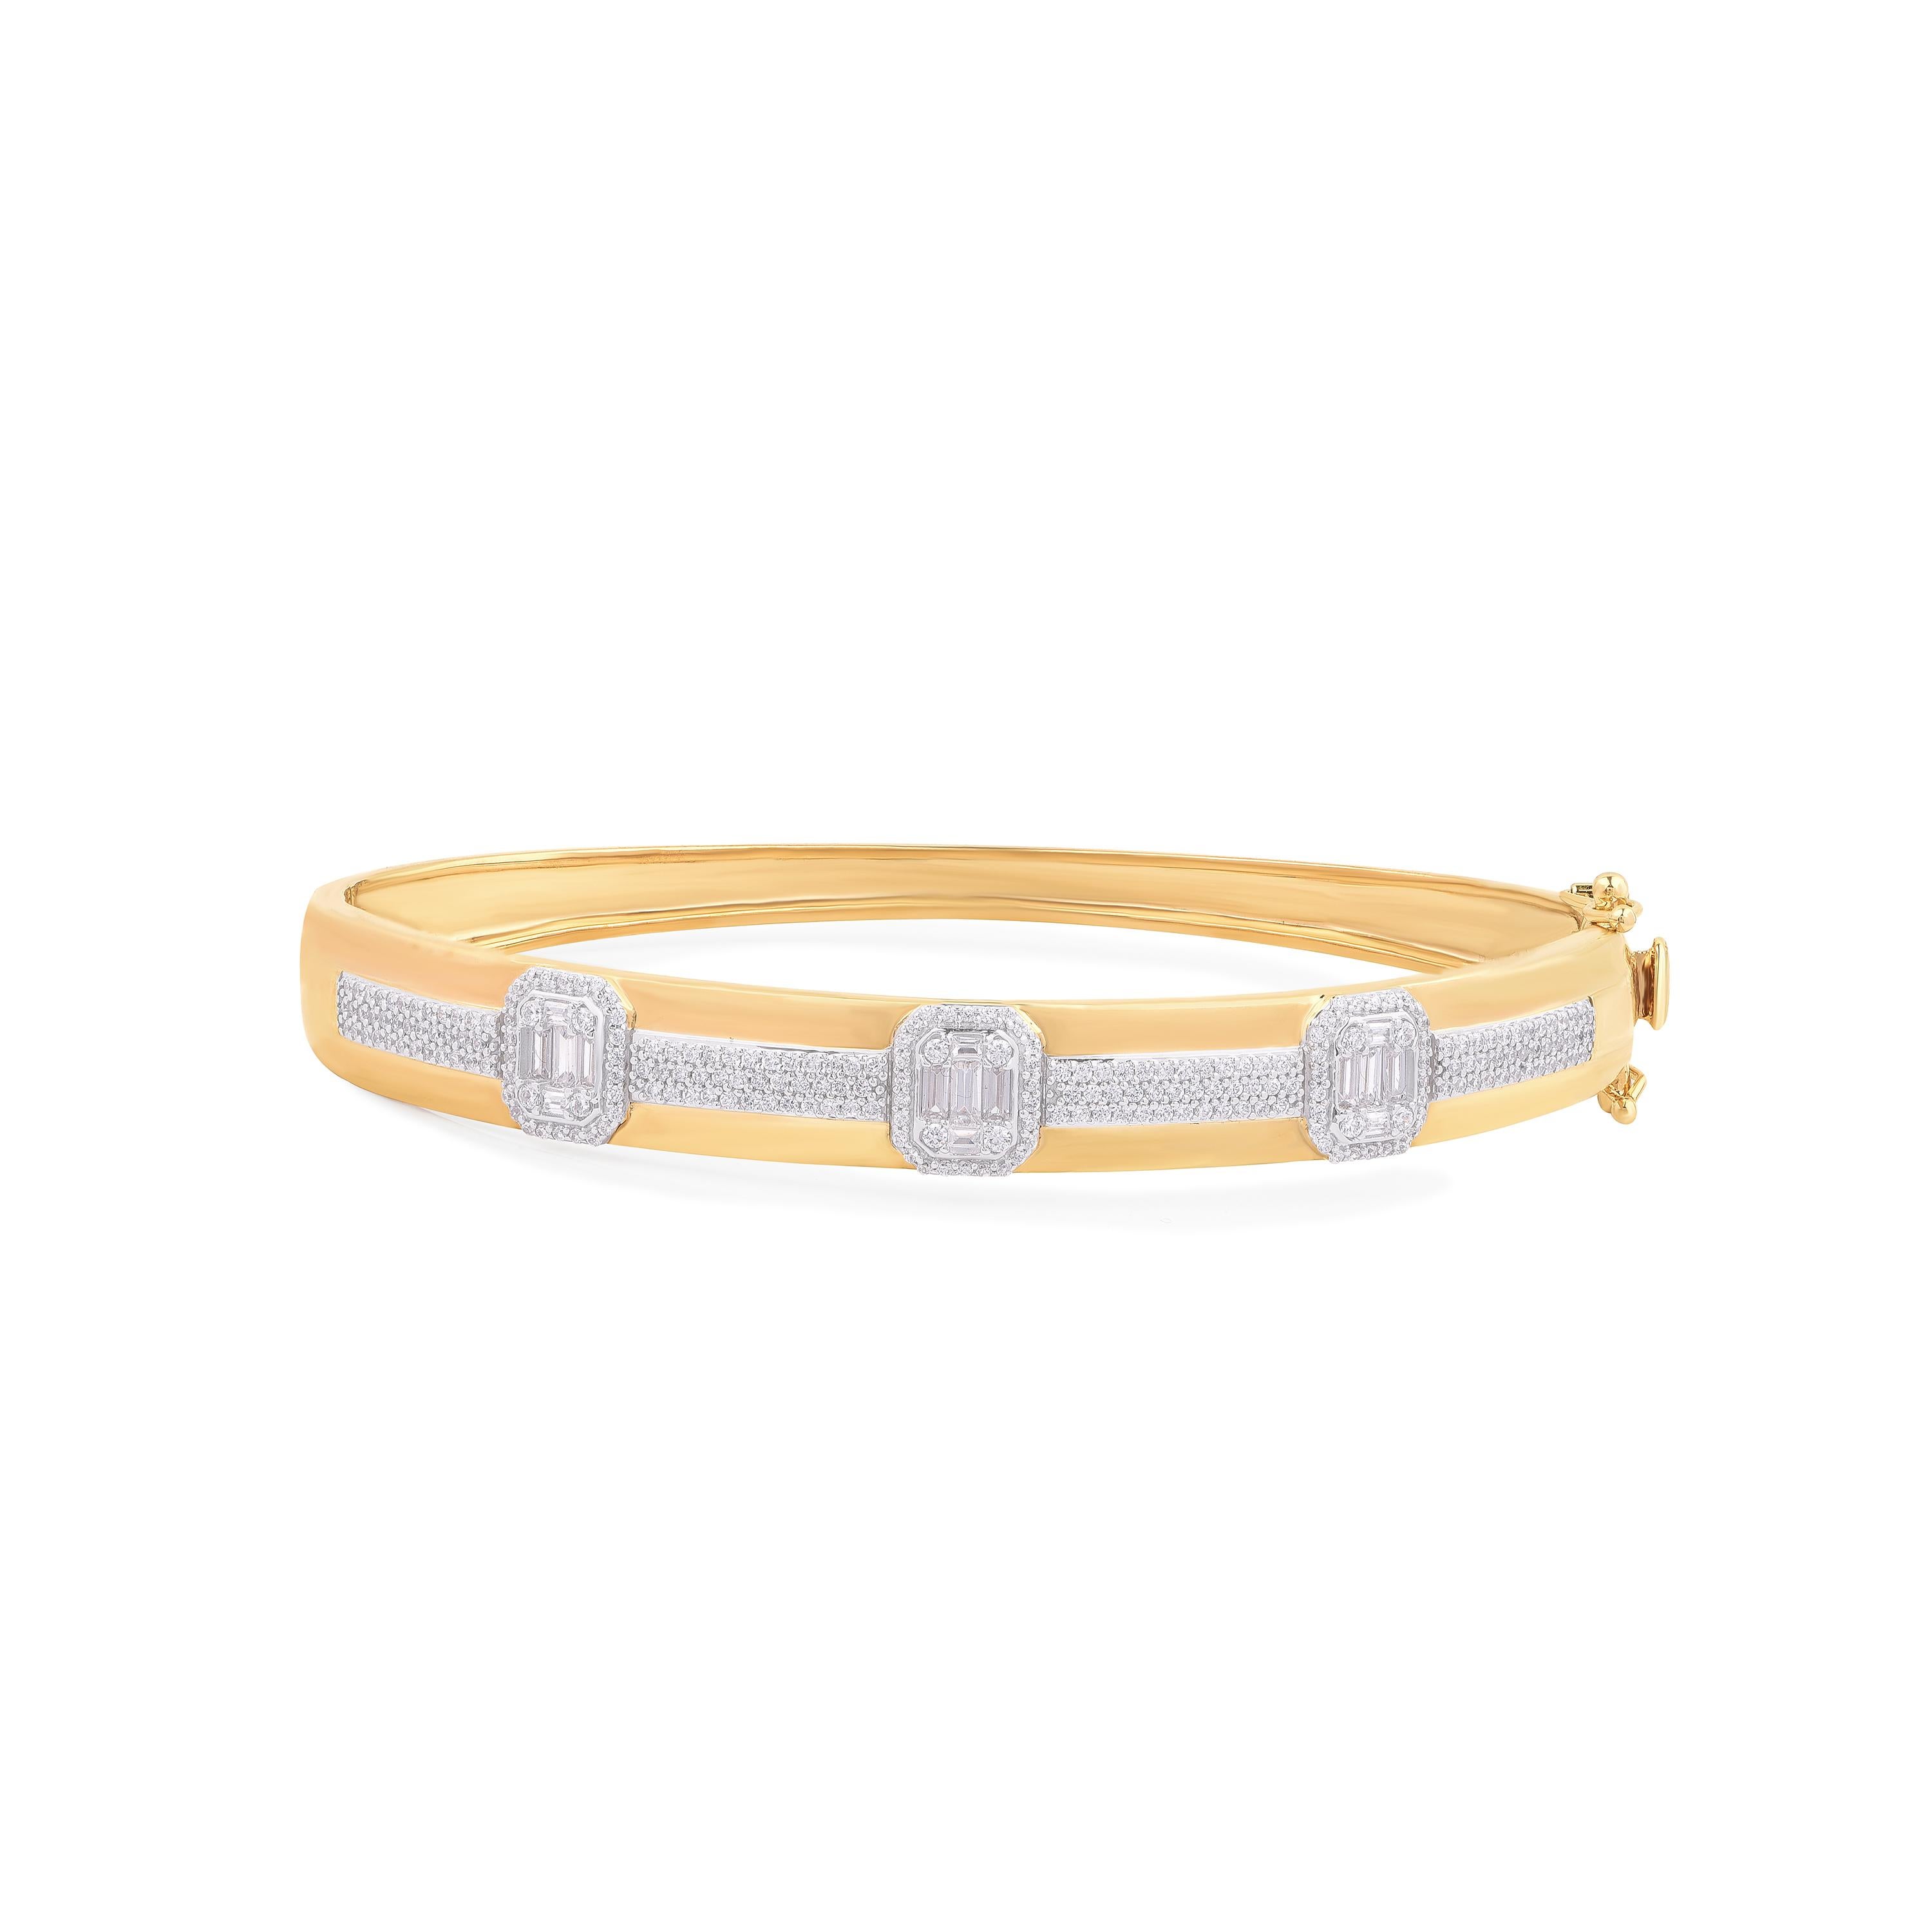 This diamond bangle is studded with 234 brilliant and 15 baguette cut diamonds elegantly set in pave, prong and channel setting - crafted by our inhouse experts in 18-karat yellow gold. The diamonds are graded H-I Color, I2 Clarity. 

Metal color